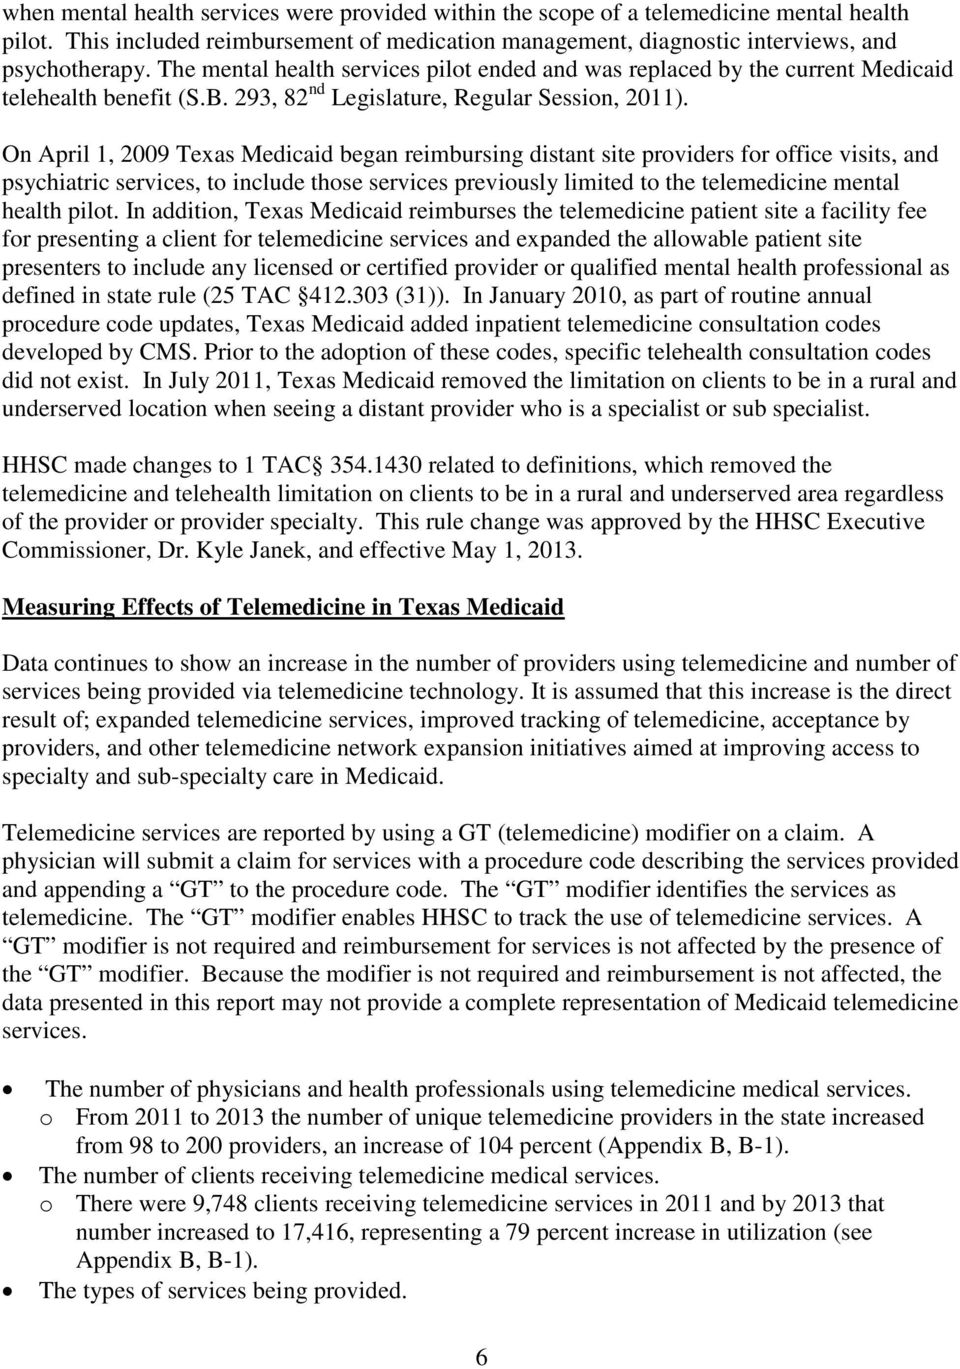 On April 1, 2009 Texas Medicaid began reimbursing distant site providers for office visits, and psychiatric services, to include those services previously limited to the telemedicine mental health